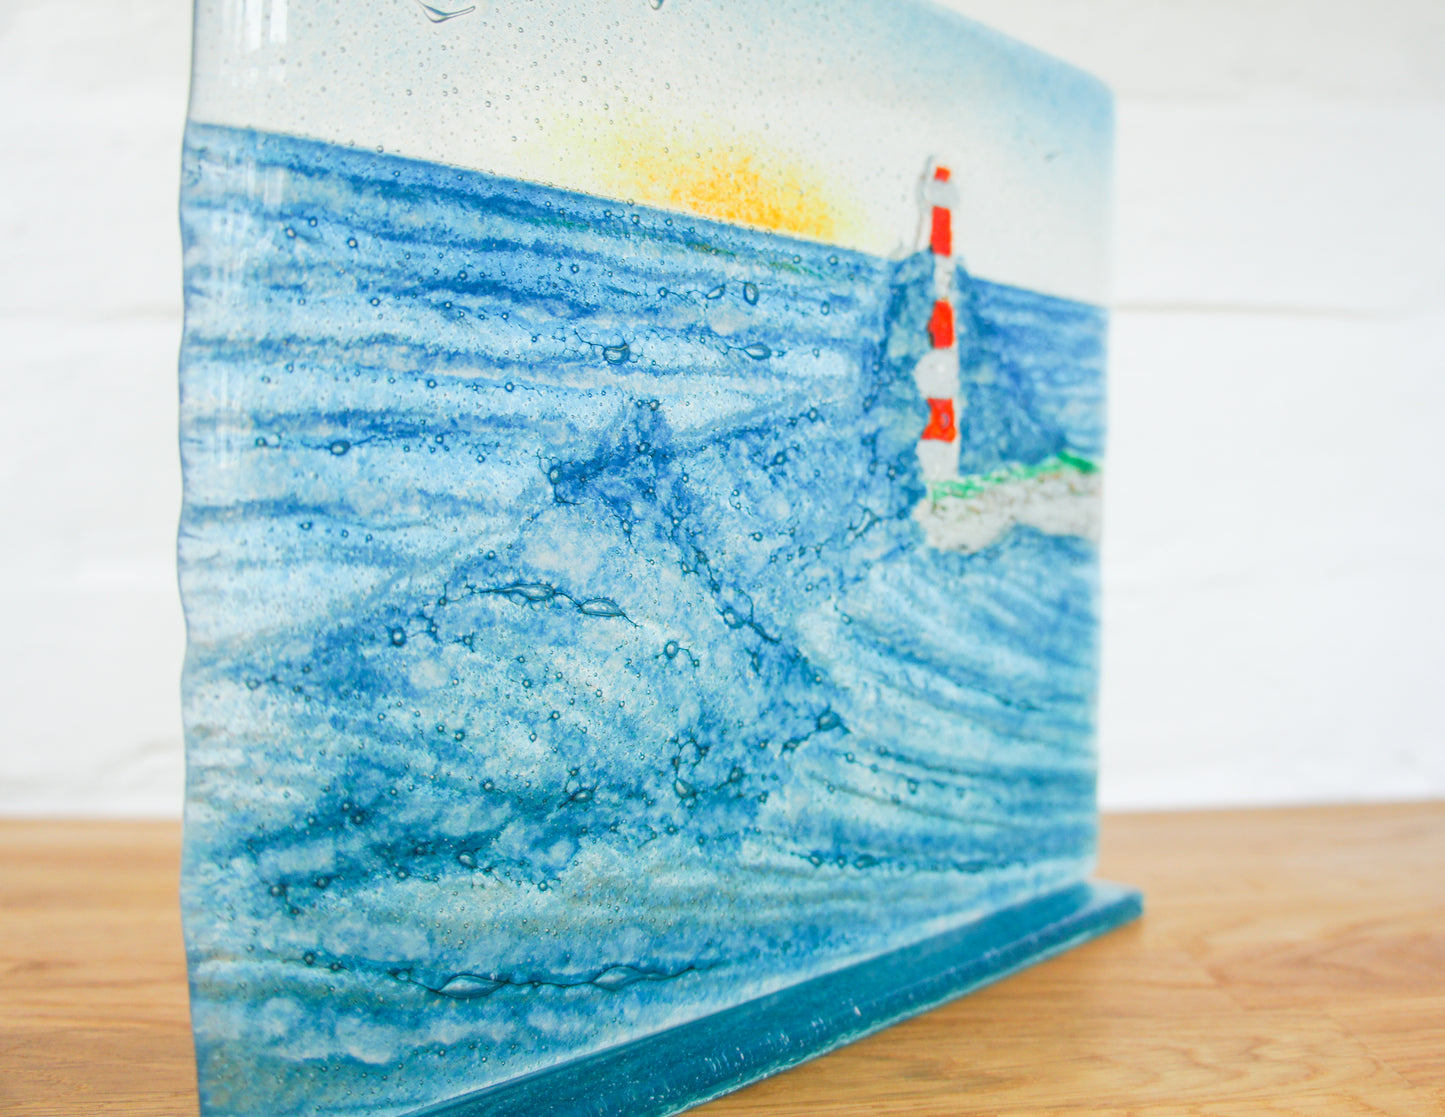 Lighthouse Wave Panel - Model 3 D3 - 22x20cm(8 1/2x7 3/4") on a foot